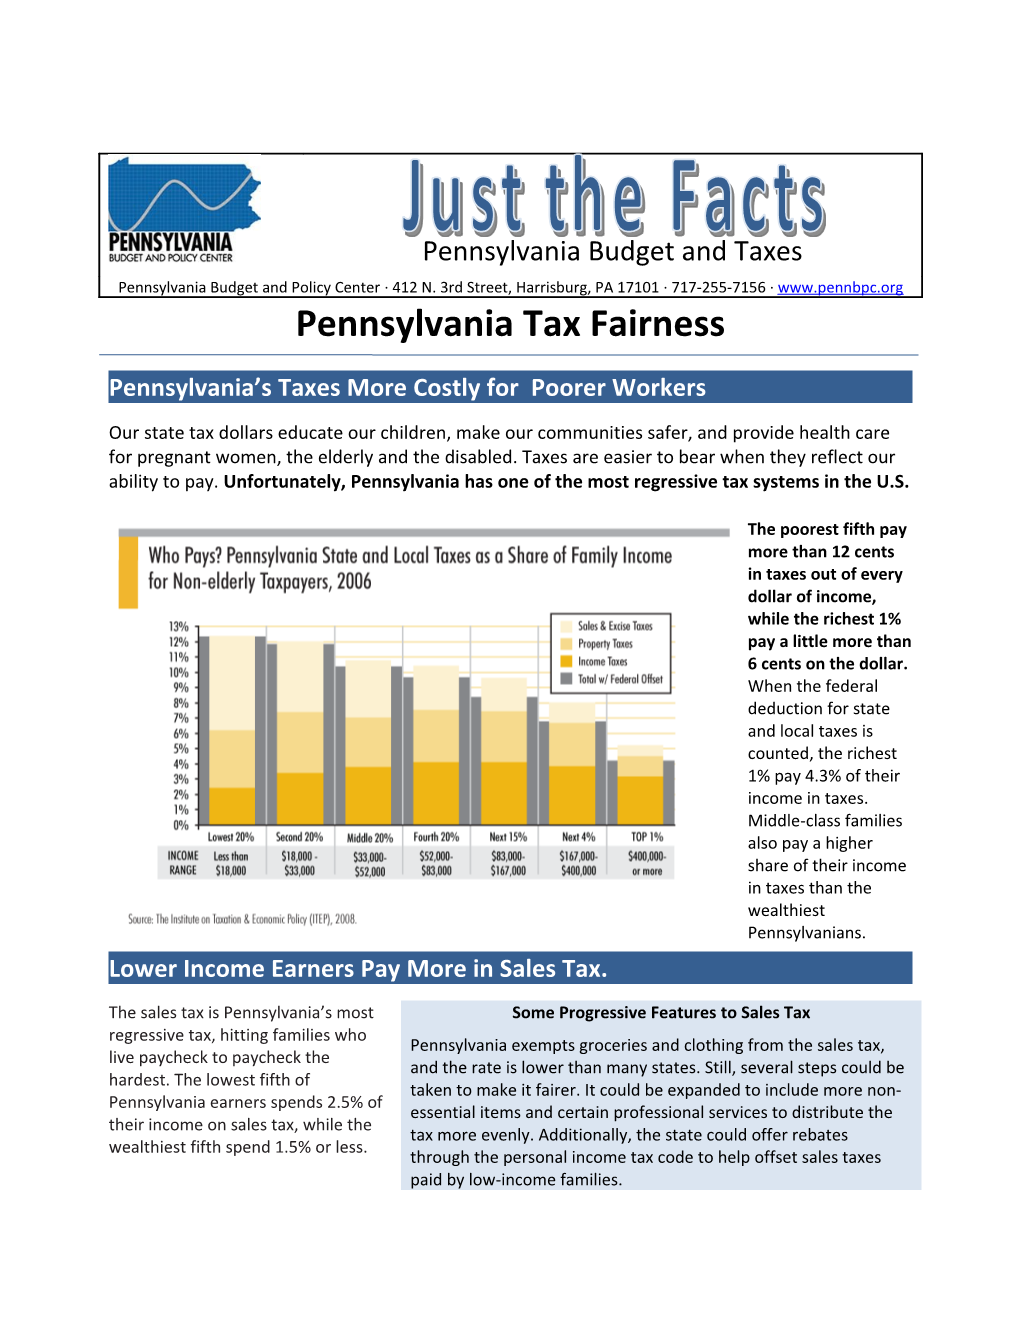 Pennsylvania S Taxes More Costly for Poorer Workers